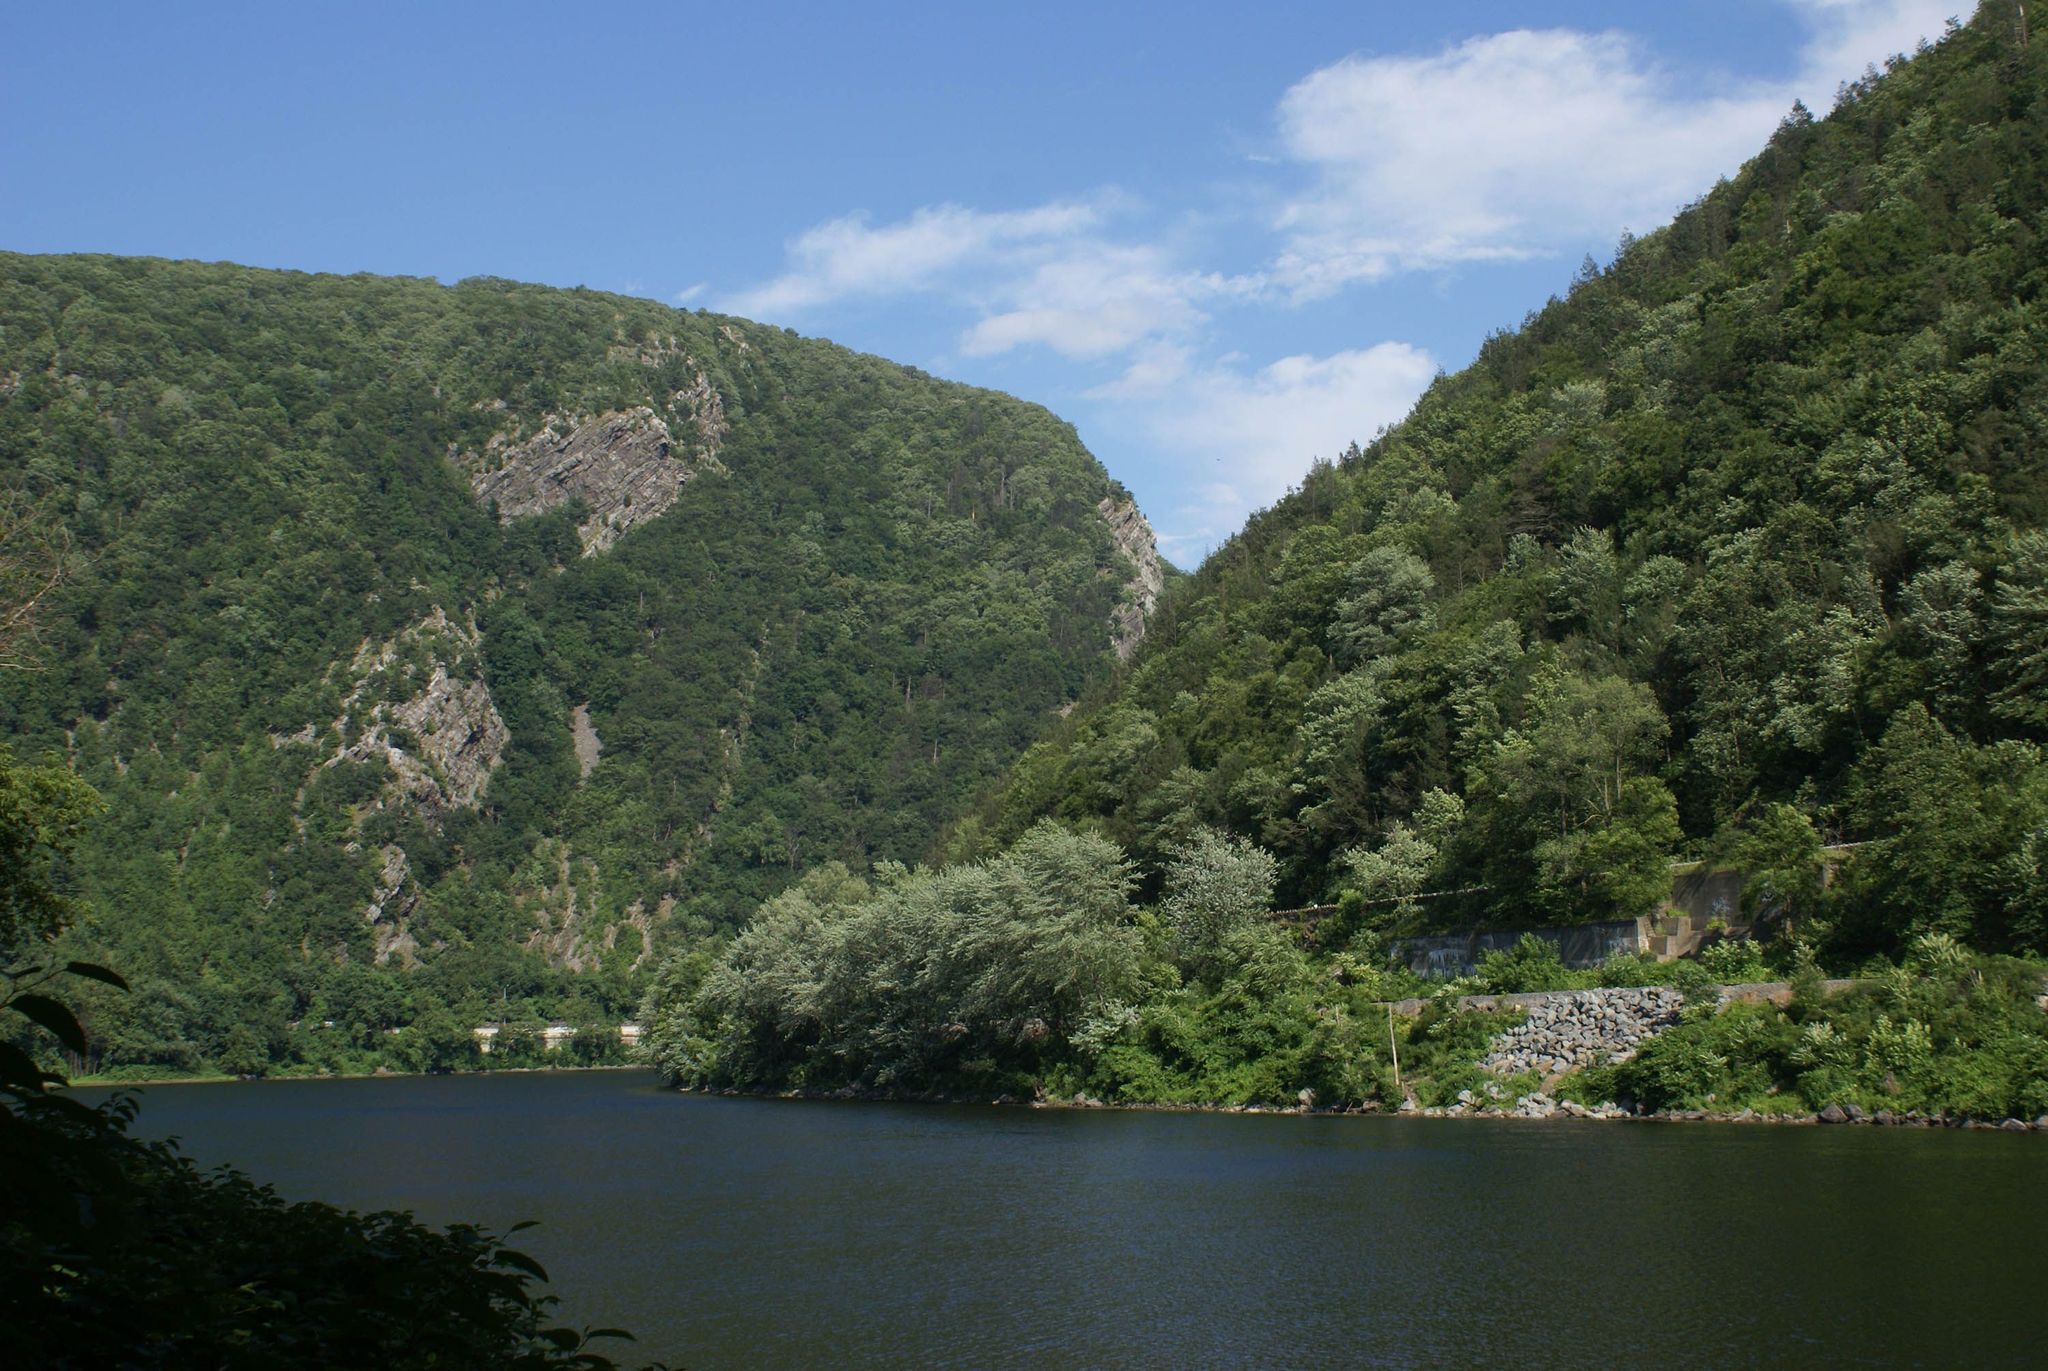 The Delaware Water Gap is the geologic formation that gives the park its name. This distinctive cut thru the Kittatinny ridgeline was made by the Delaware River over thousands of years.